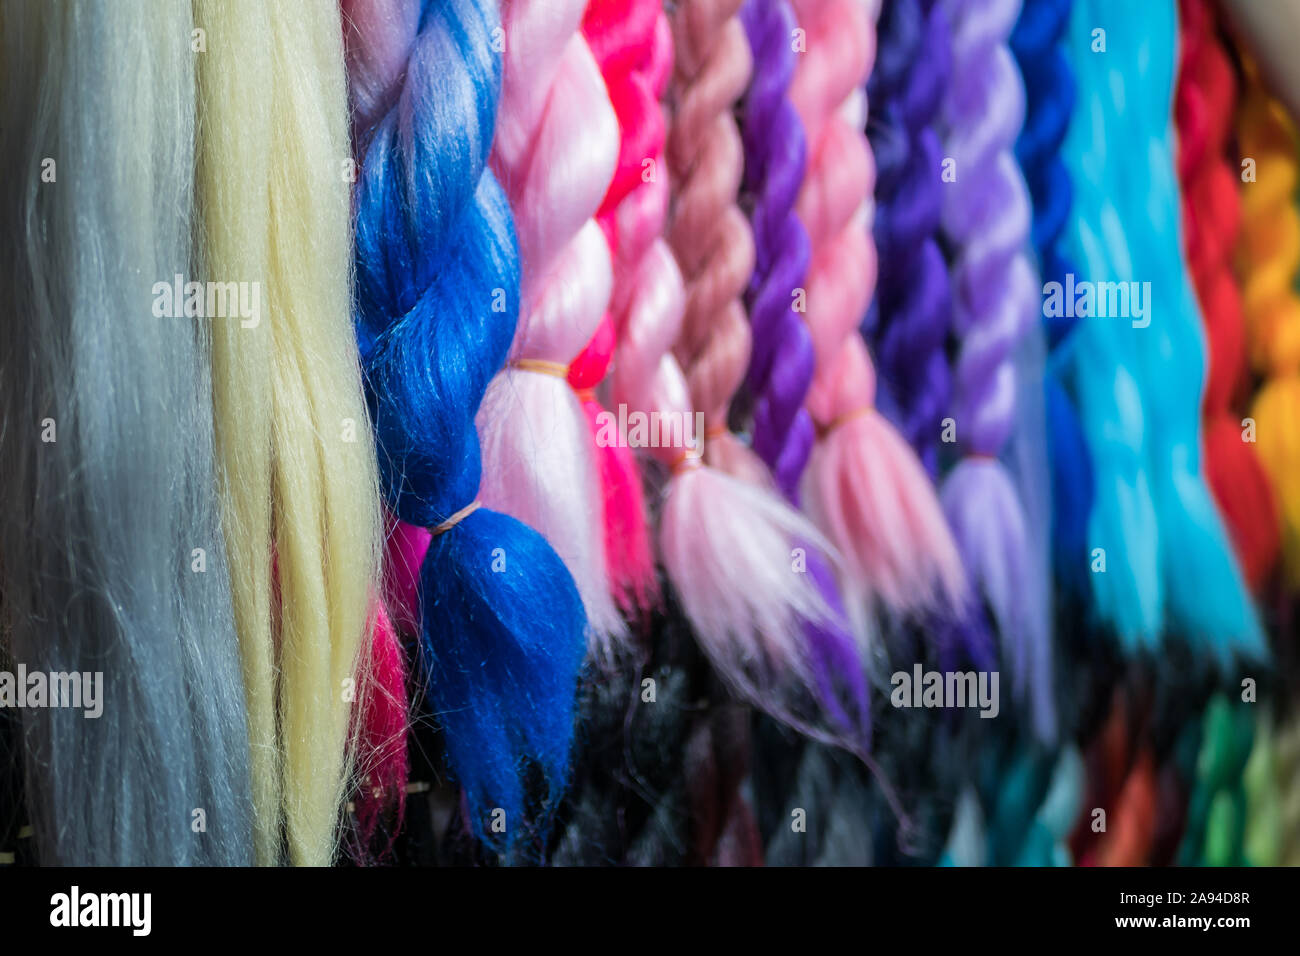 Close-up view of the colorful artificial braiding hairs Stock Photo